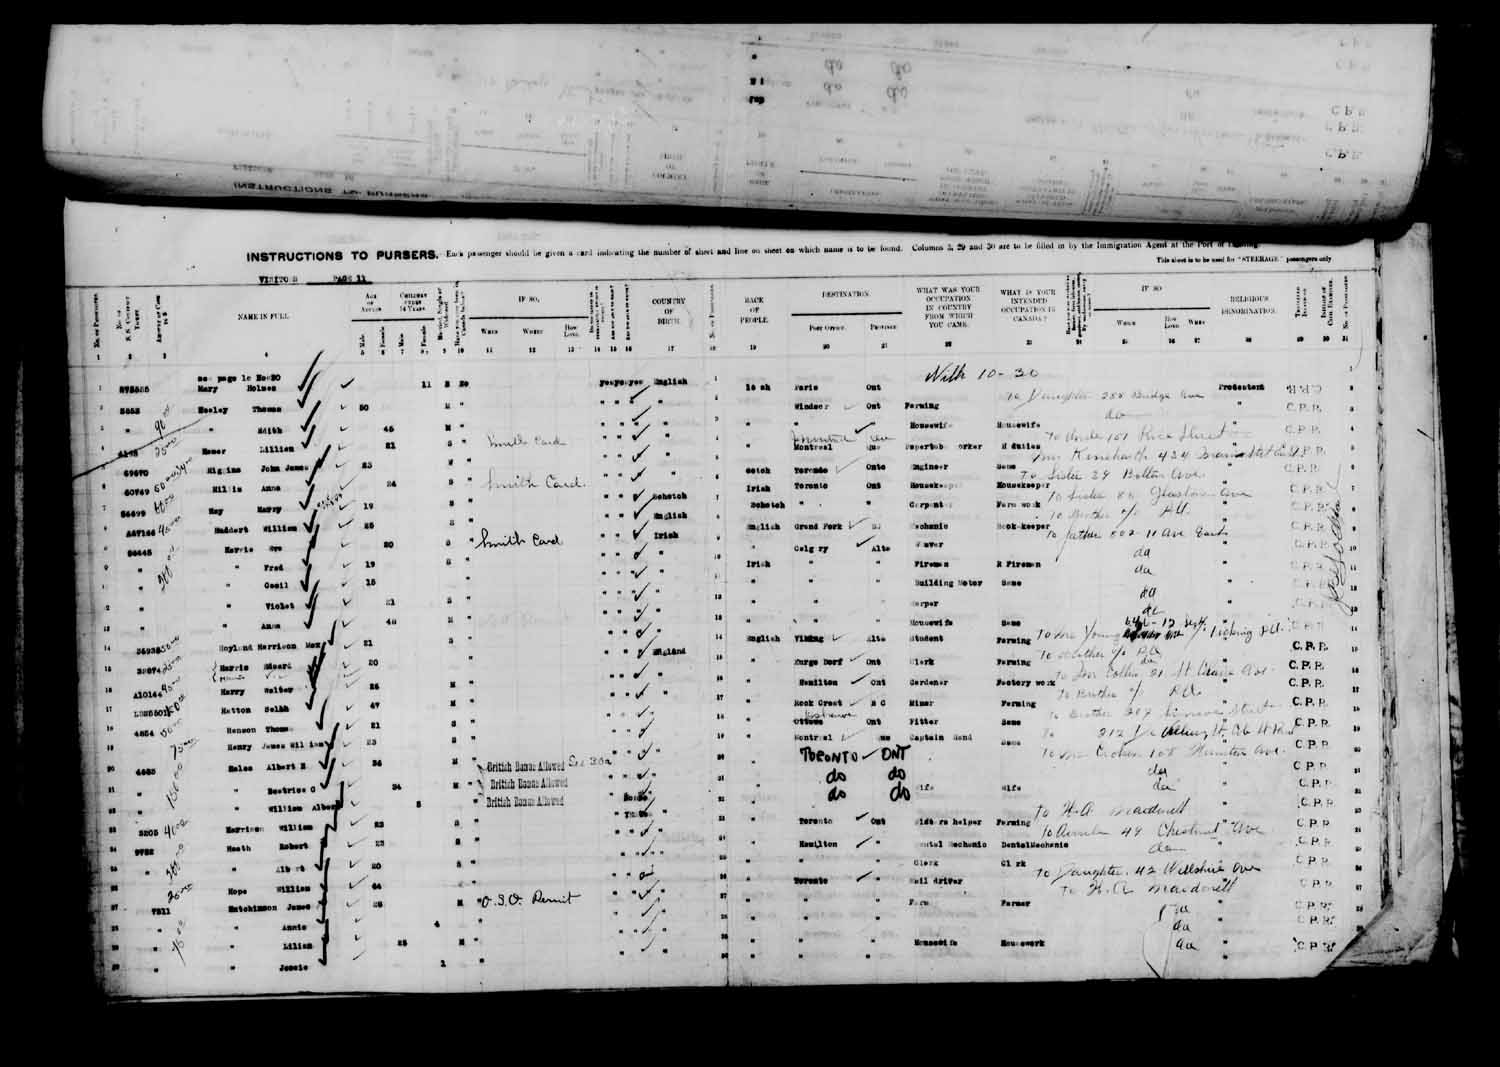 Digitized page of Passenger Lists for Image No.: e003610651